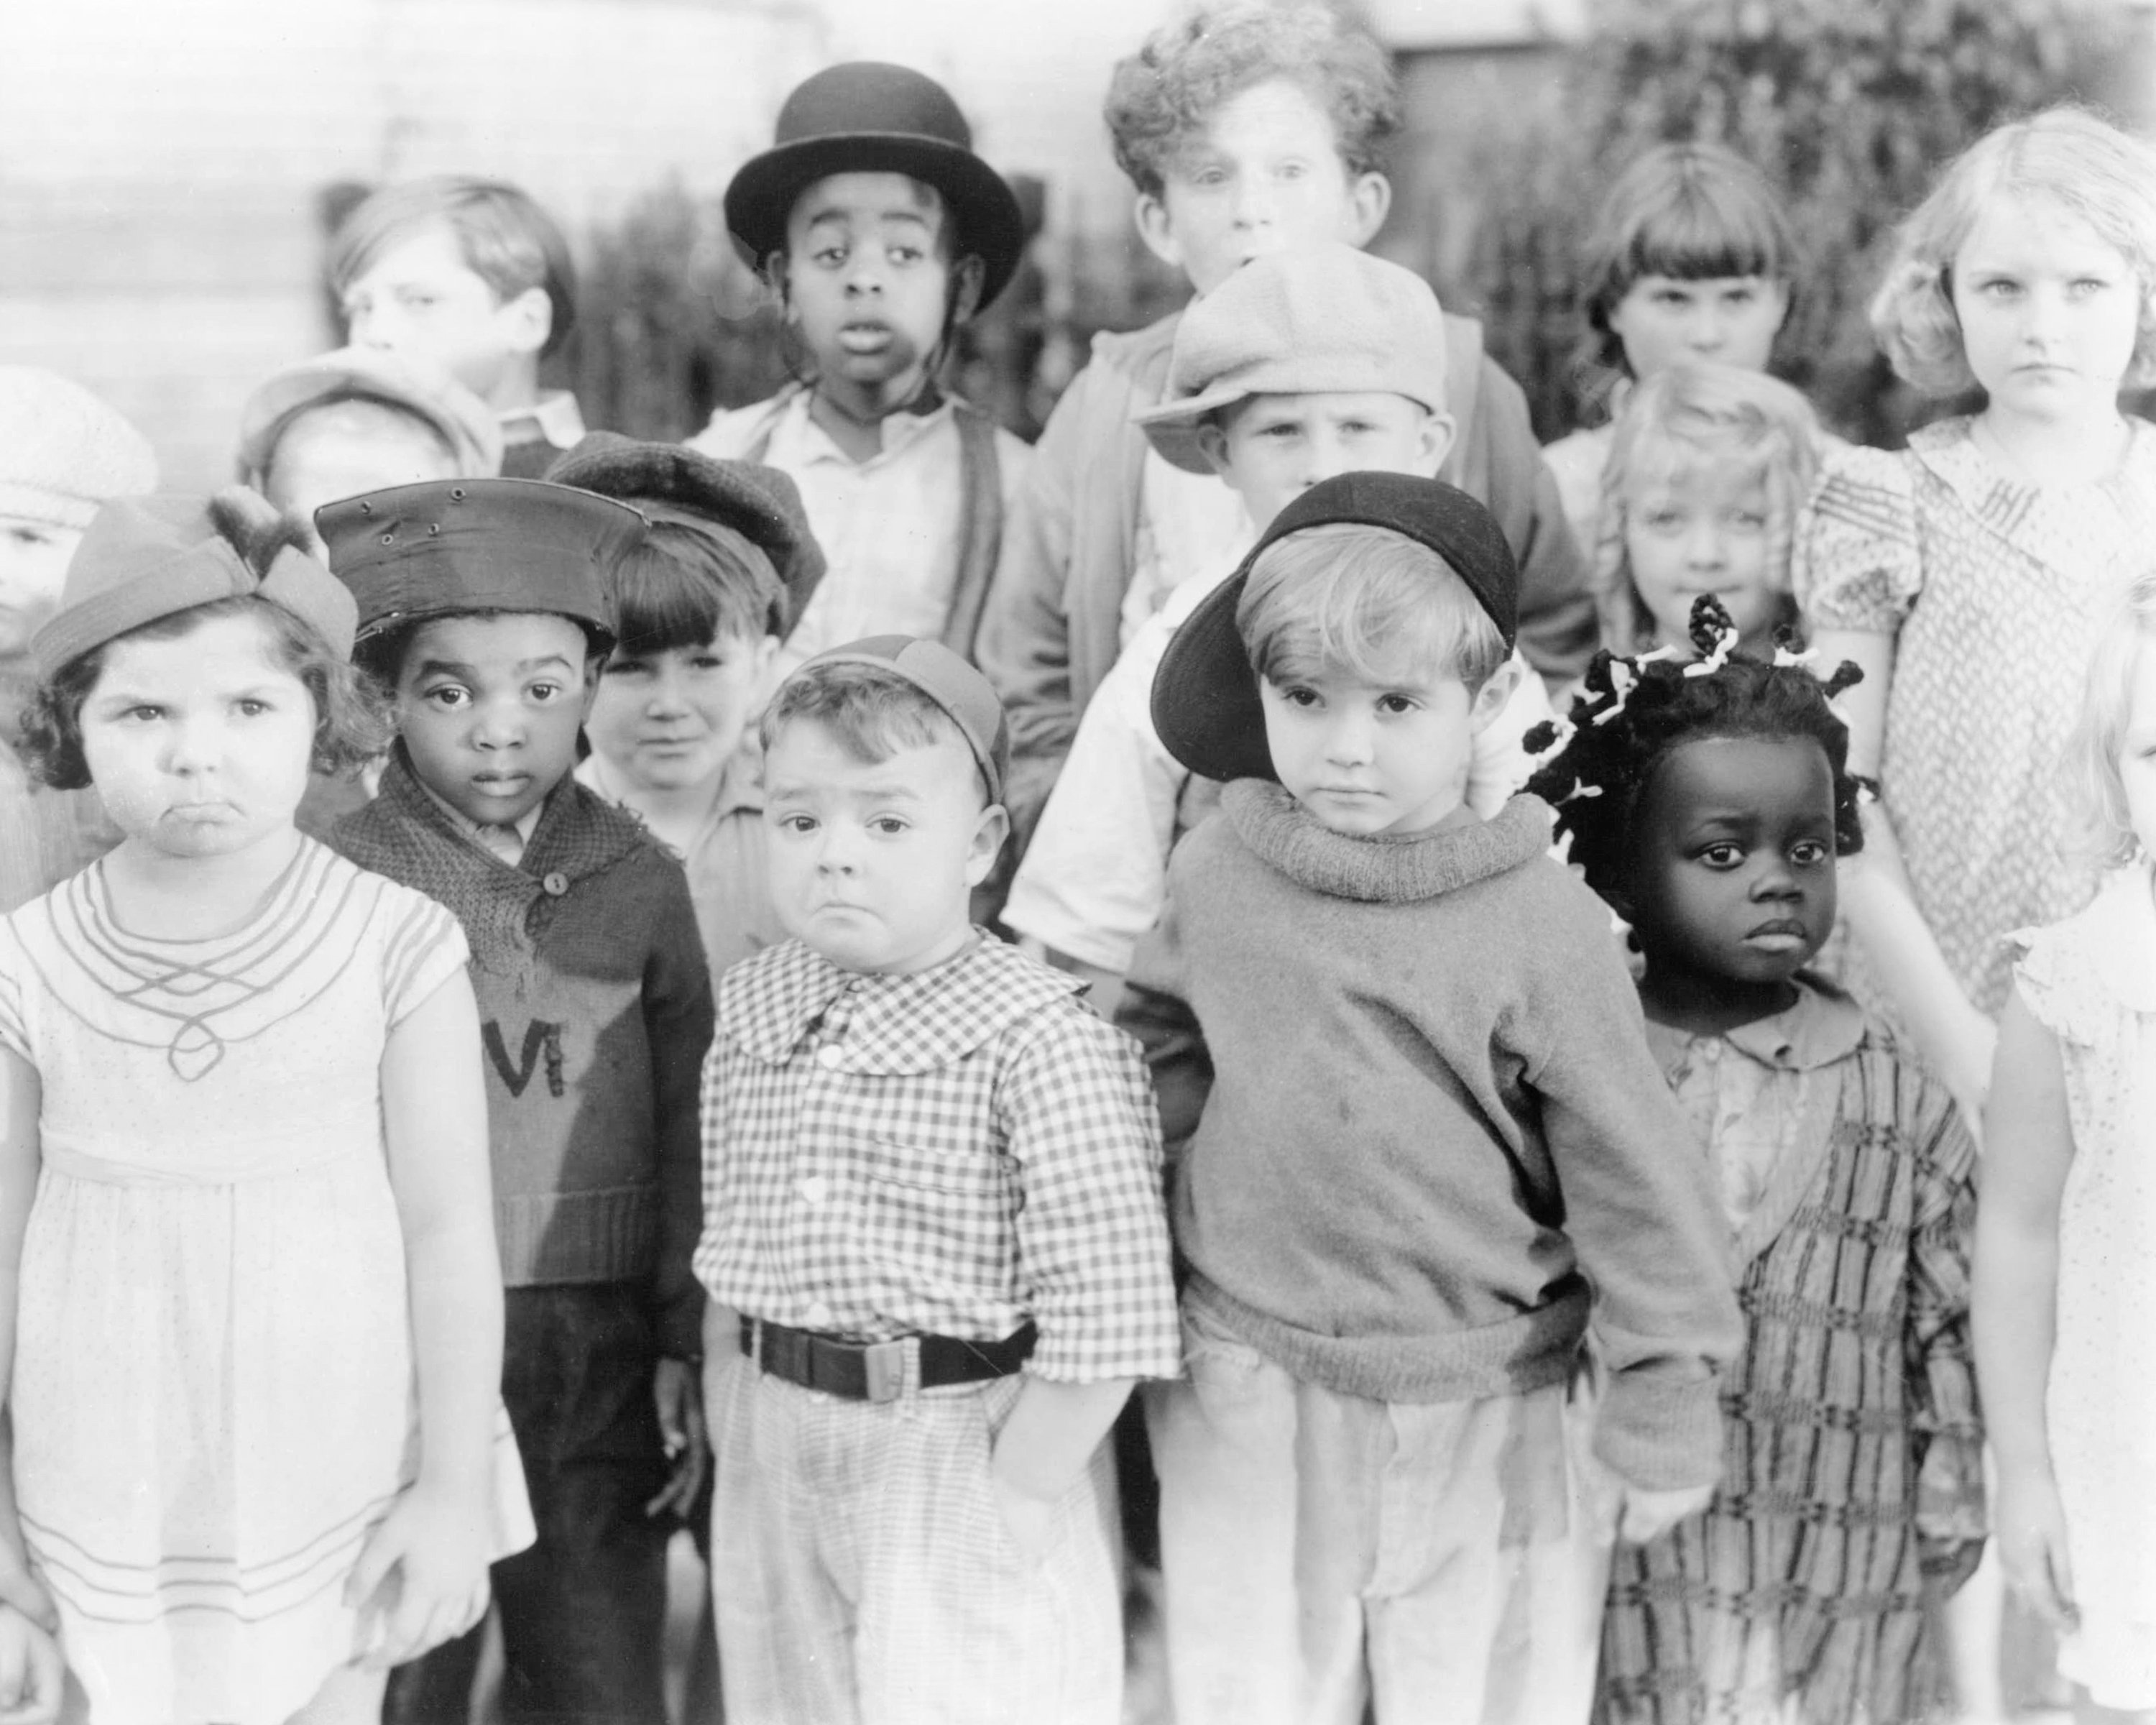 At far left is Eileen Bernstein and, from third left are George McFarland (1928 - 1993), Scotty Beckett (1929 - 1968) and Billie Thomas (1931 - 1980). Matthew Beard (1925 - 1981) | Source: Getty Images